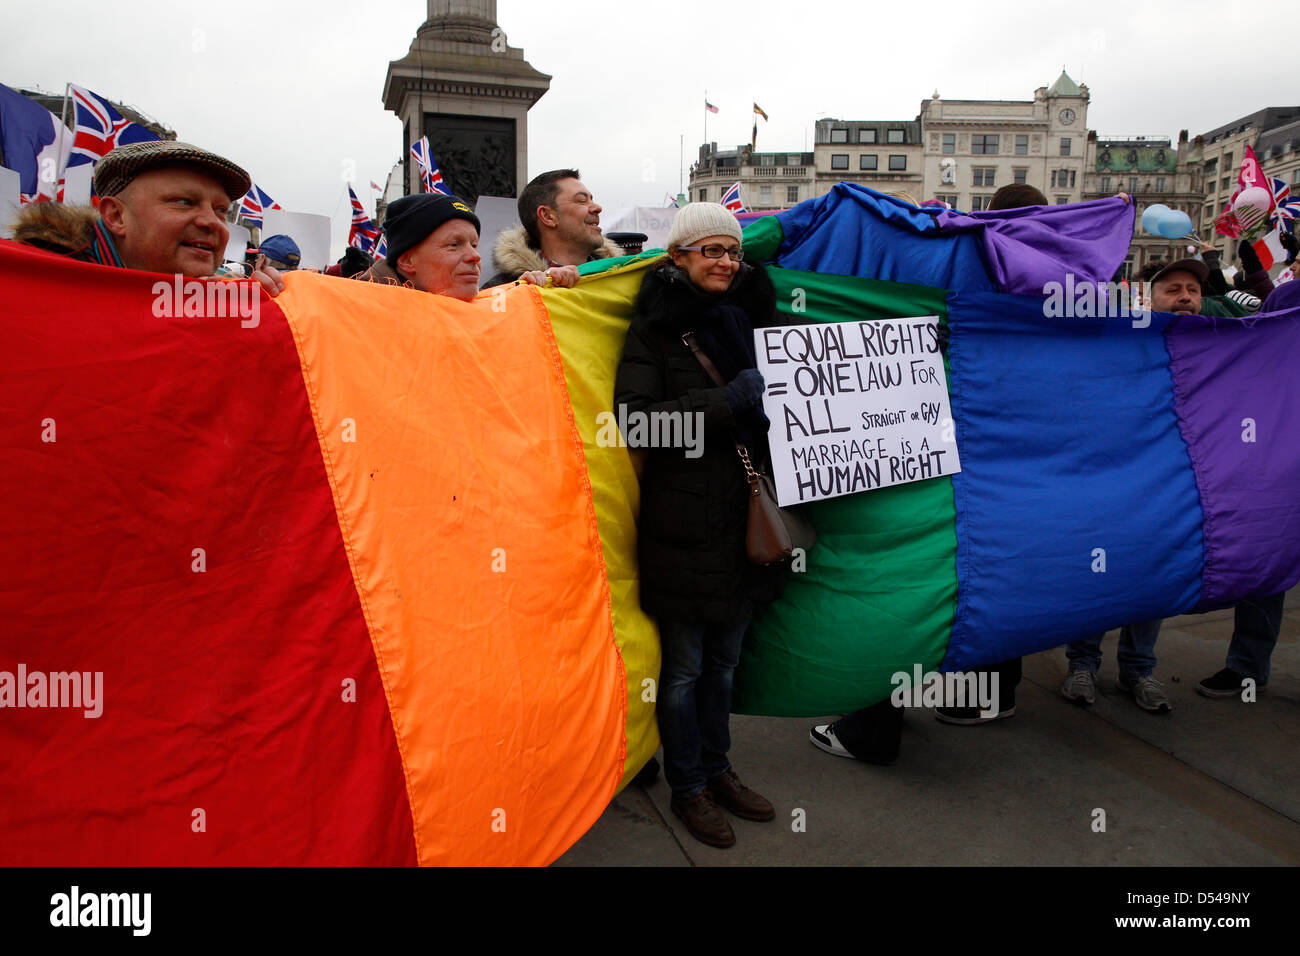 London, UK. 24th March, 2013.  Protesters against homophobia and for gay marriage were holding rainbow flags and placards during the demo. French protesters alongside religious groups are organising an Anti-Gay rally in Trafalgar Square.  Anglican Mainstream are urging Christians to turn up to protest Stock Photo